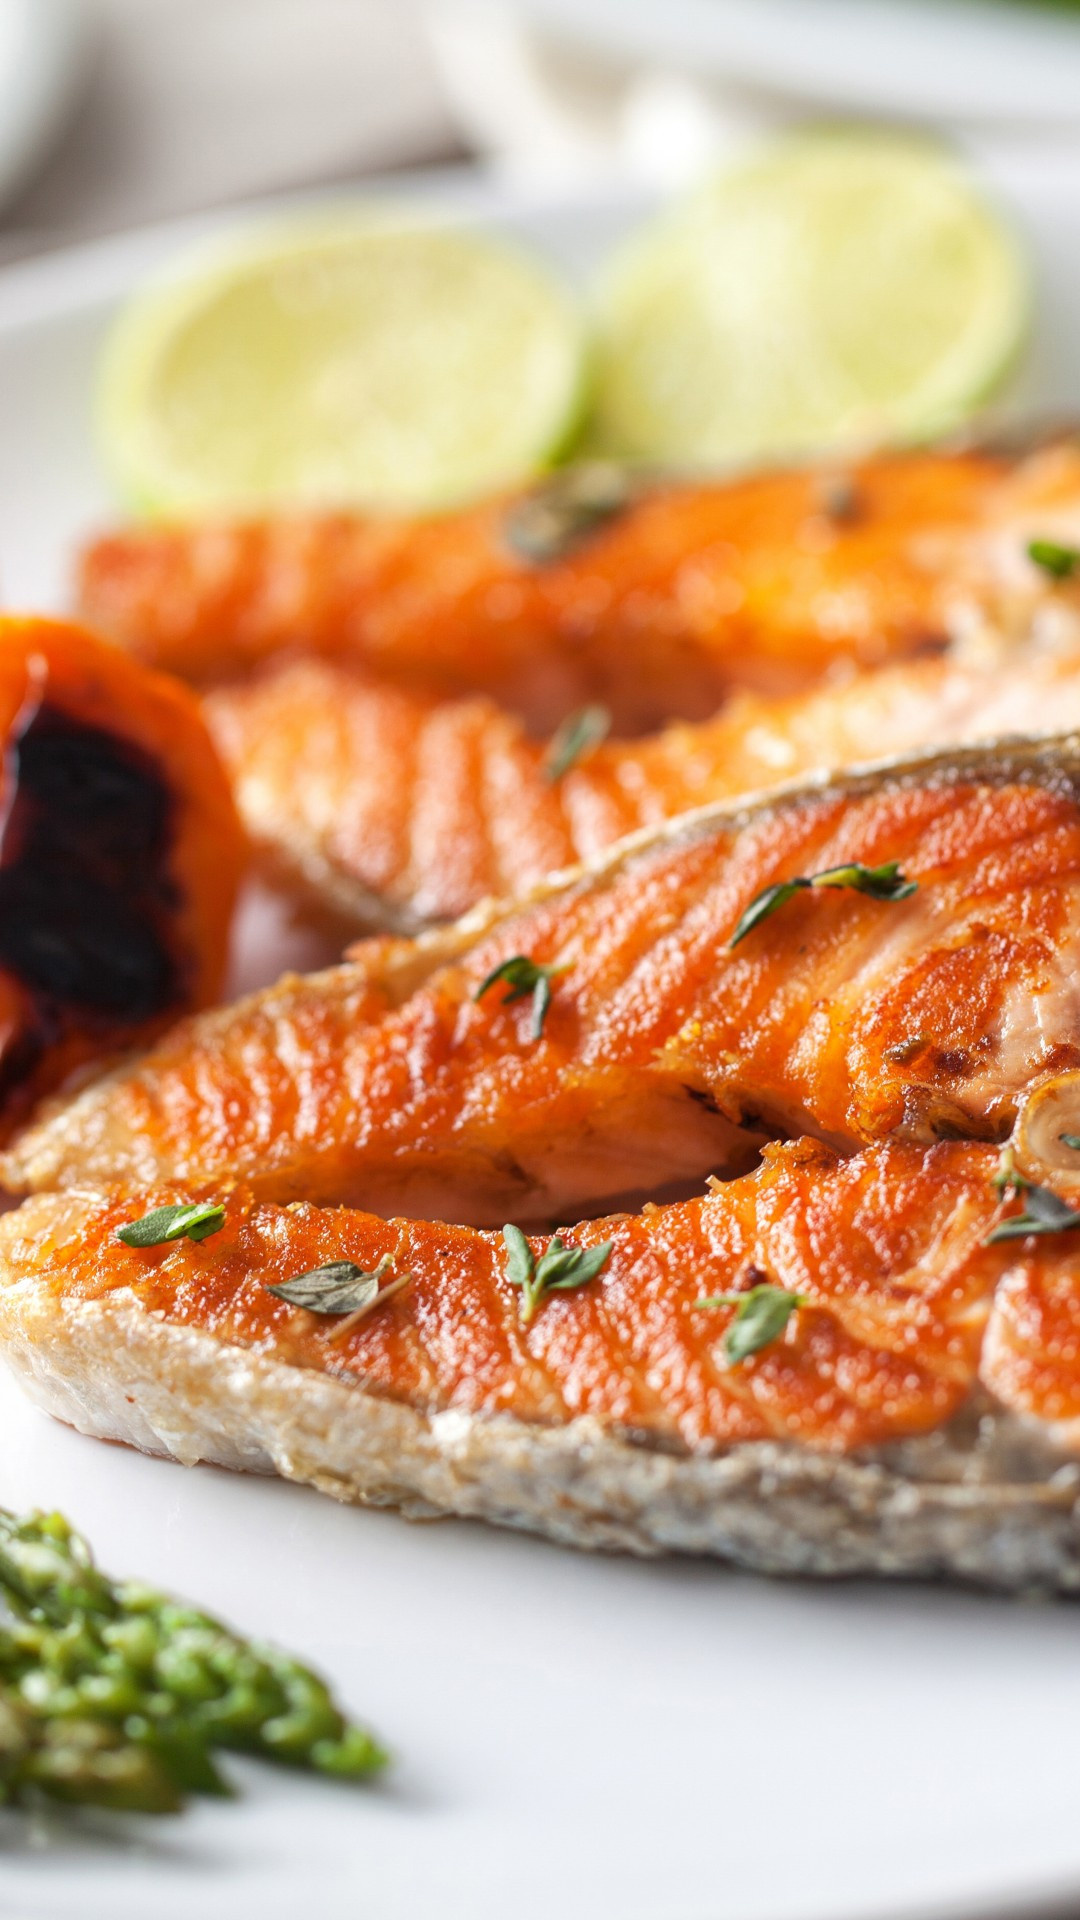 Seafood: Grilled fish, Rich in long-chain omega-3 fatty acids. 1080x1920 Full HD Wallpaper.